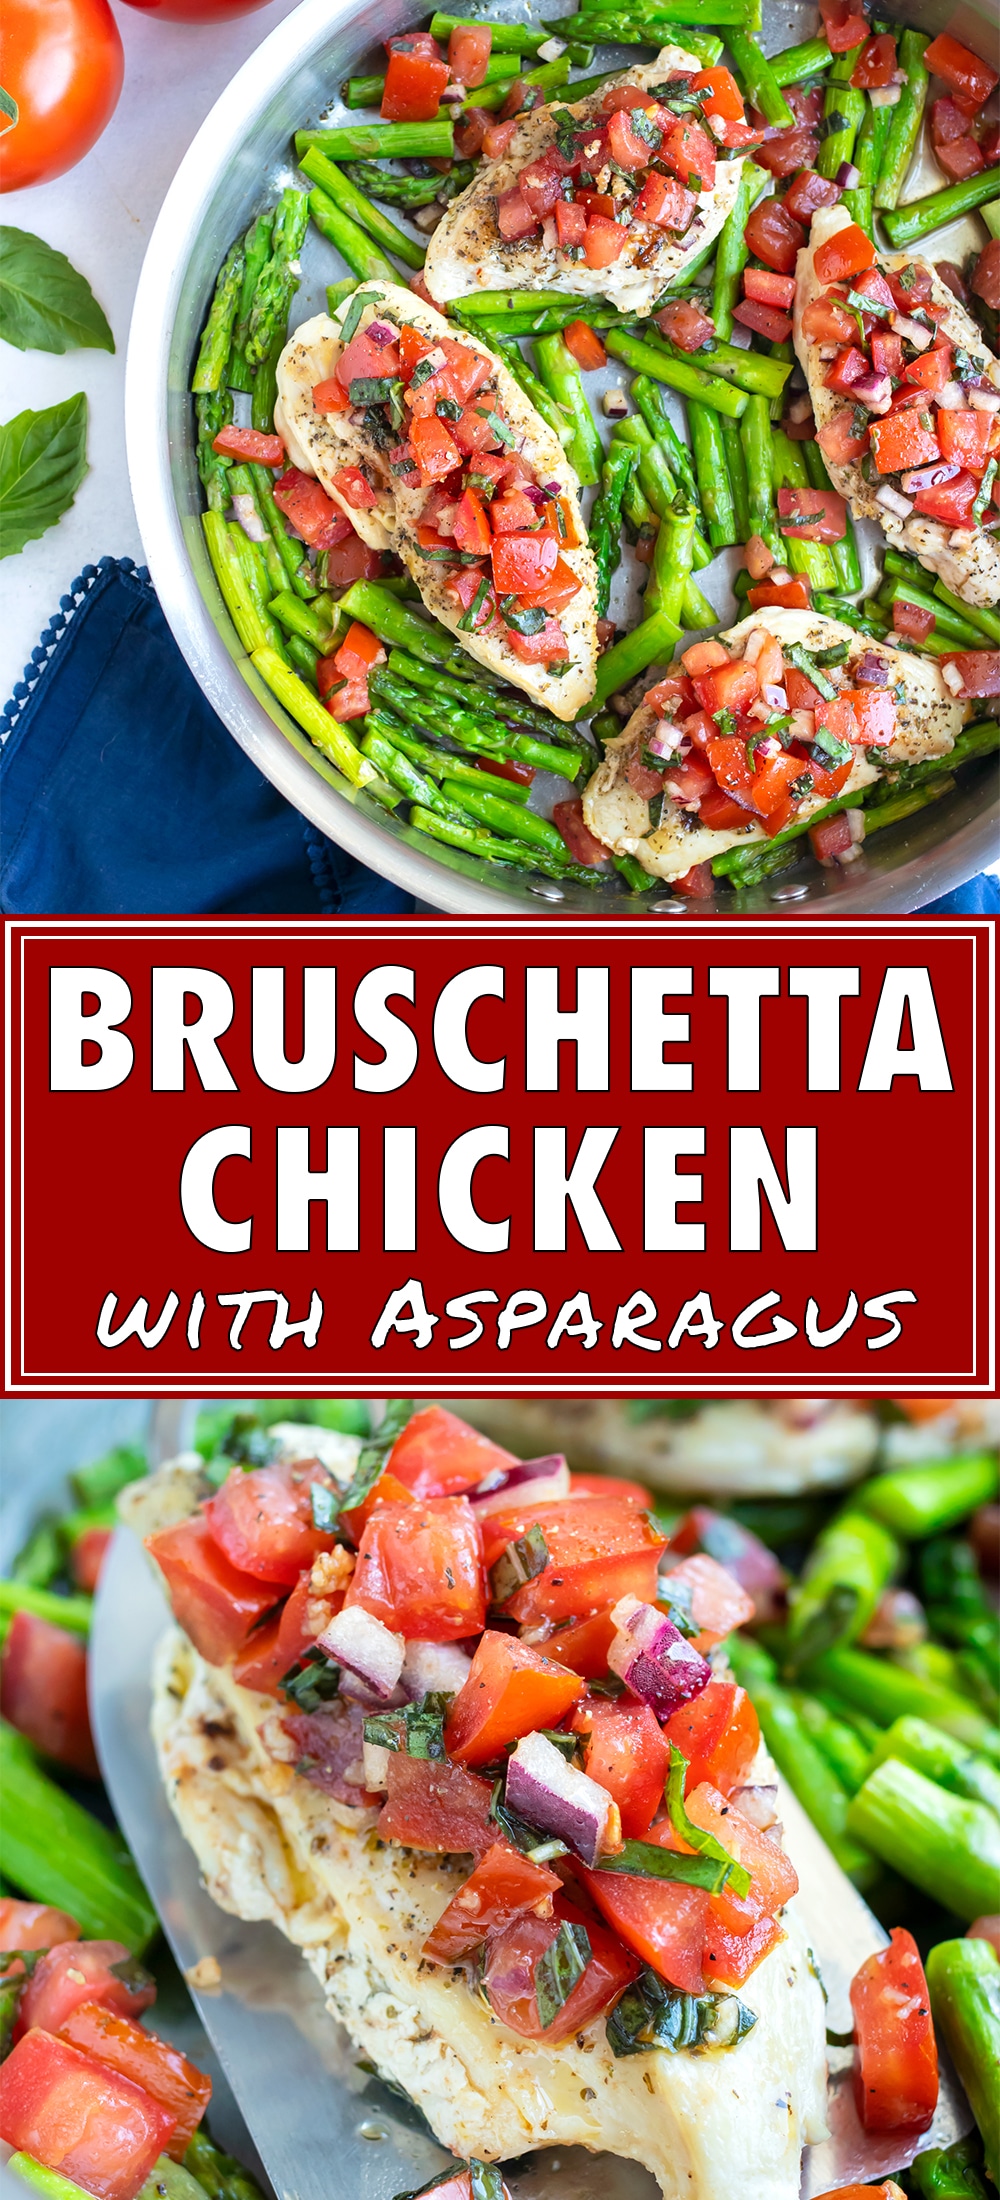 30-Minute Bruschetta Chicken and Asparagus - Evolving Table